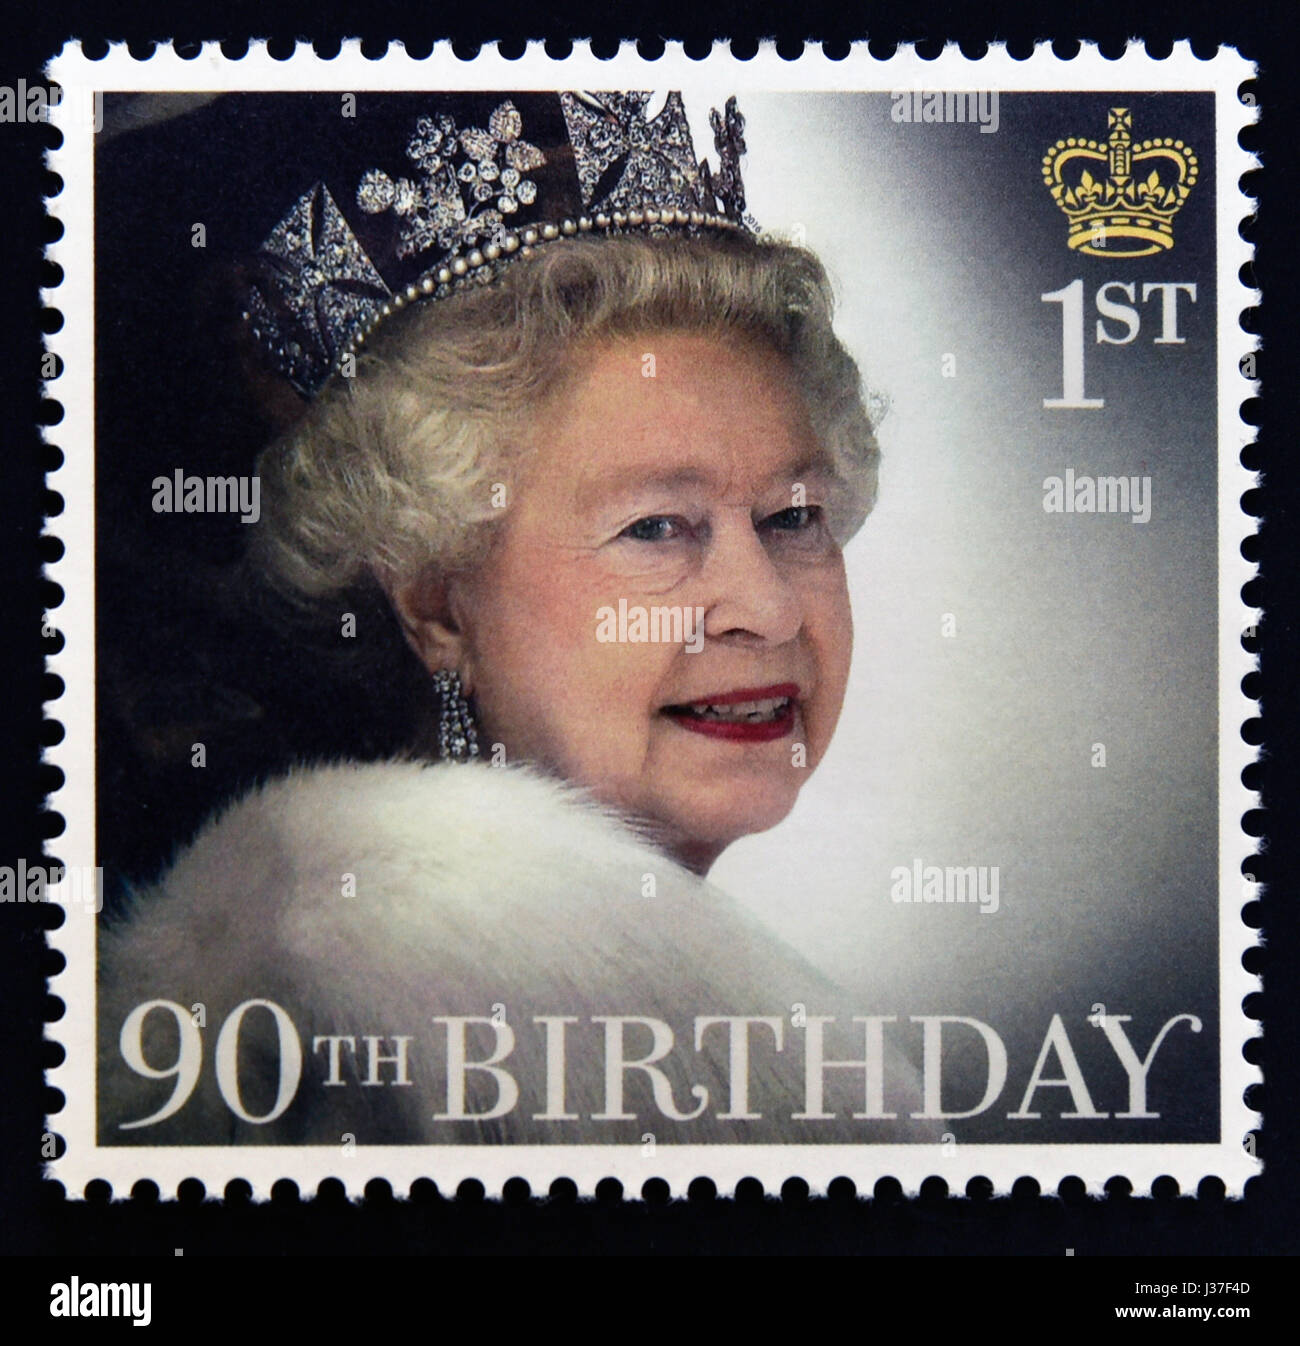 Postage stamp. Great Britain. Queen Elizabeth II. 2016. HM The Queen's 90th Birthday. HM The Queen attends the State Opening of Parliament 2012. Stock Photo